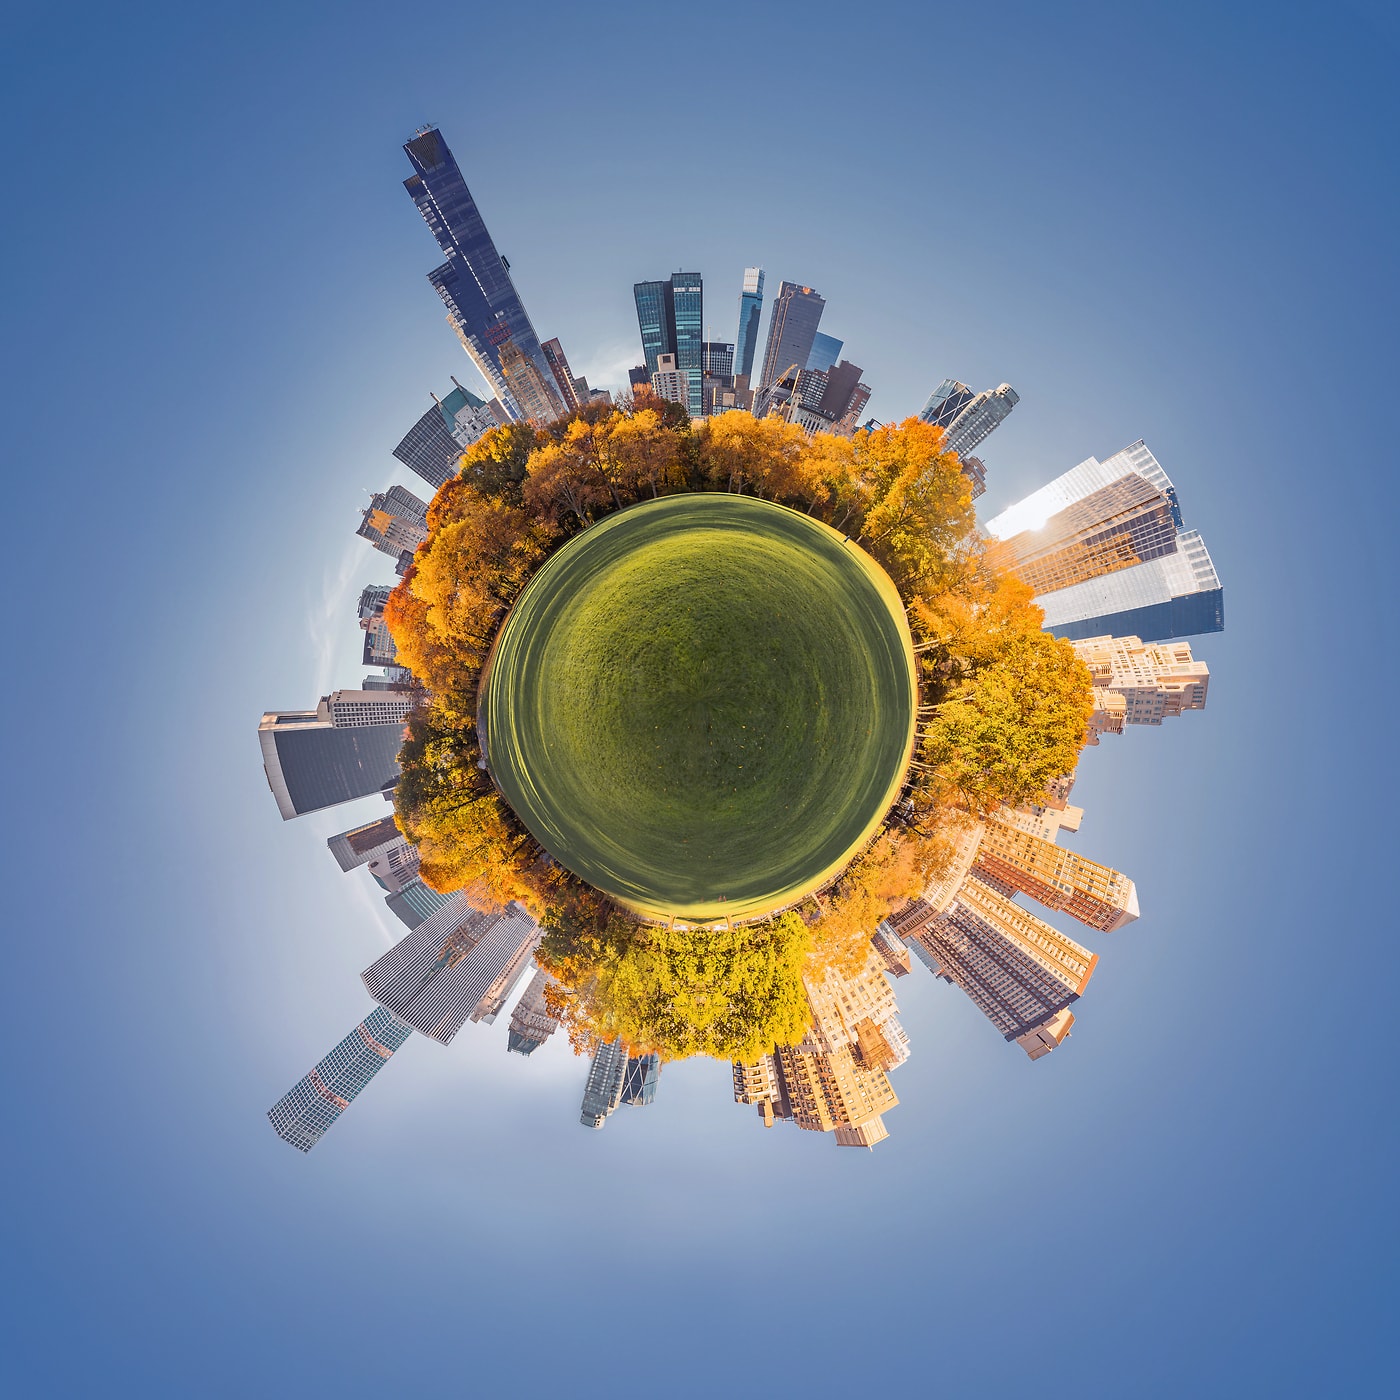 236 megapixels! A very high resolution abstract spherical planet VAST photo of autumn in Central Park, New York City; cityscape artwork created by Dan Piech.